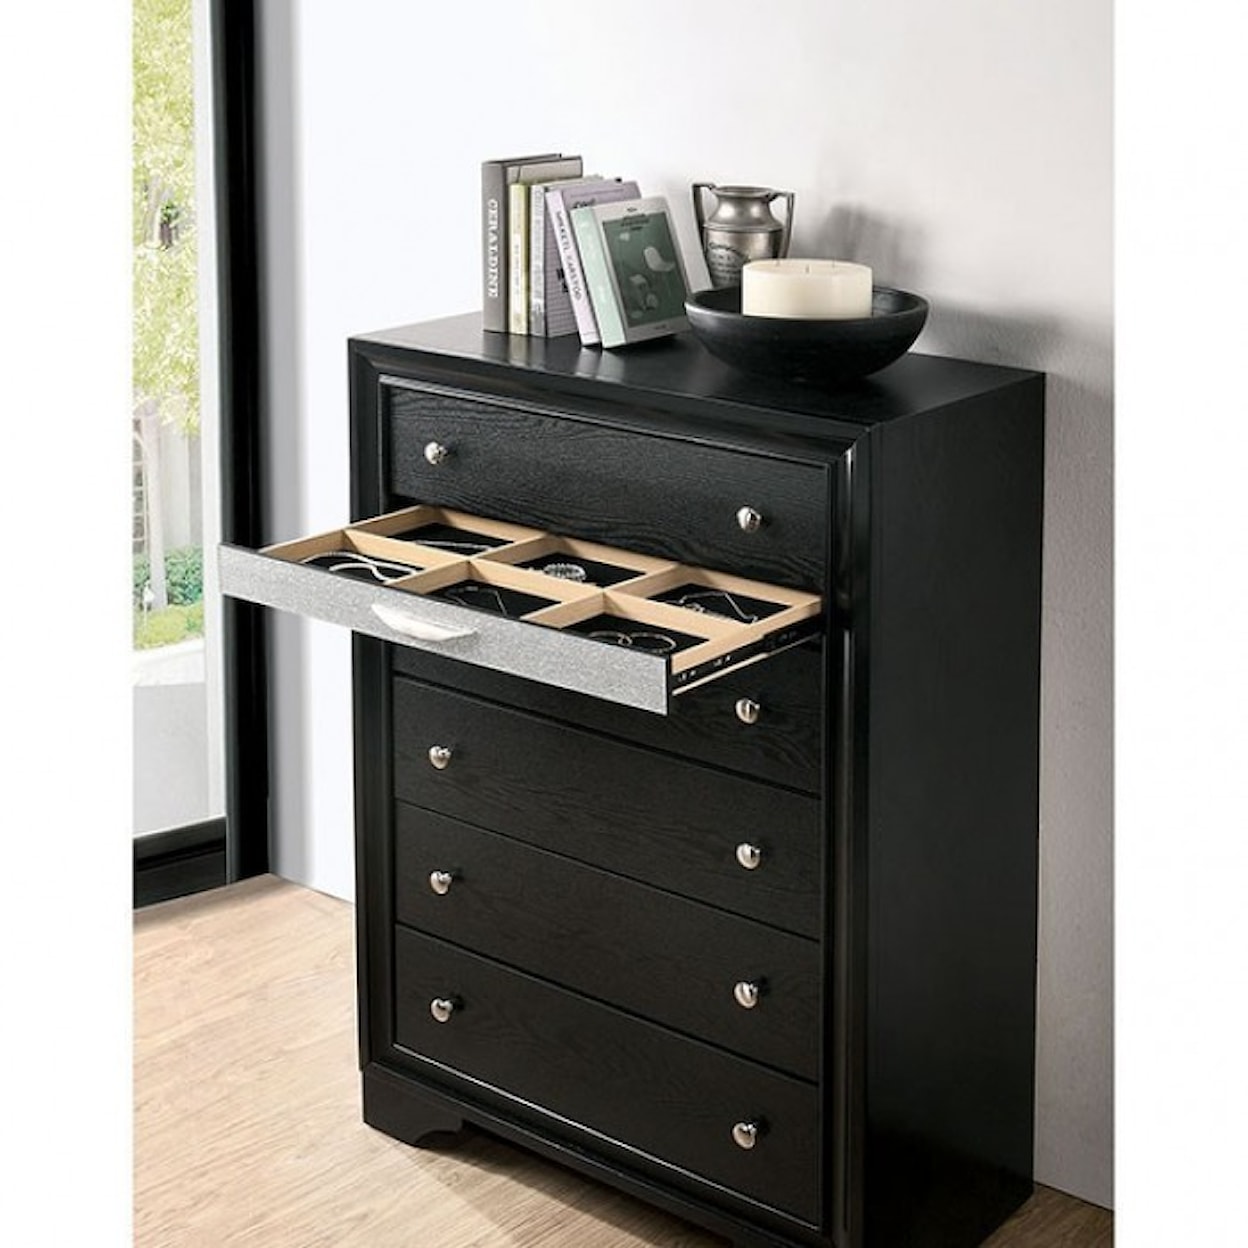 Furniture of America Chrissy Chest of Drawers